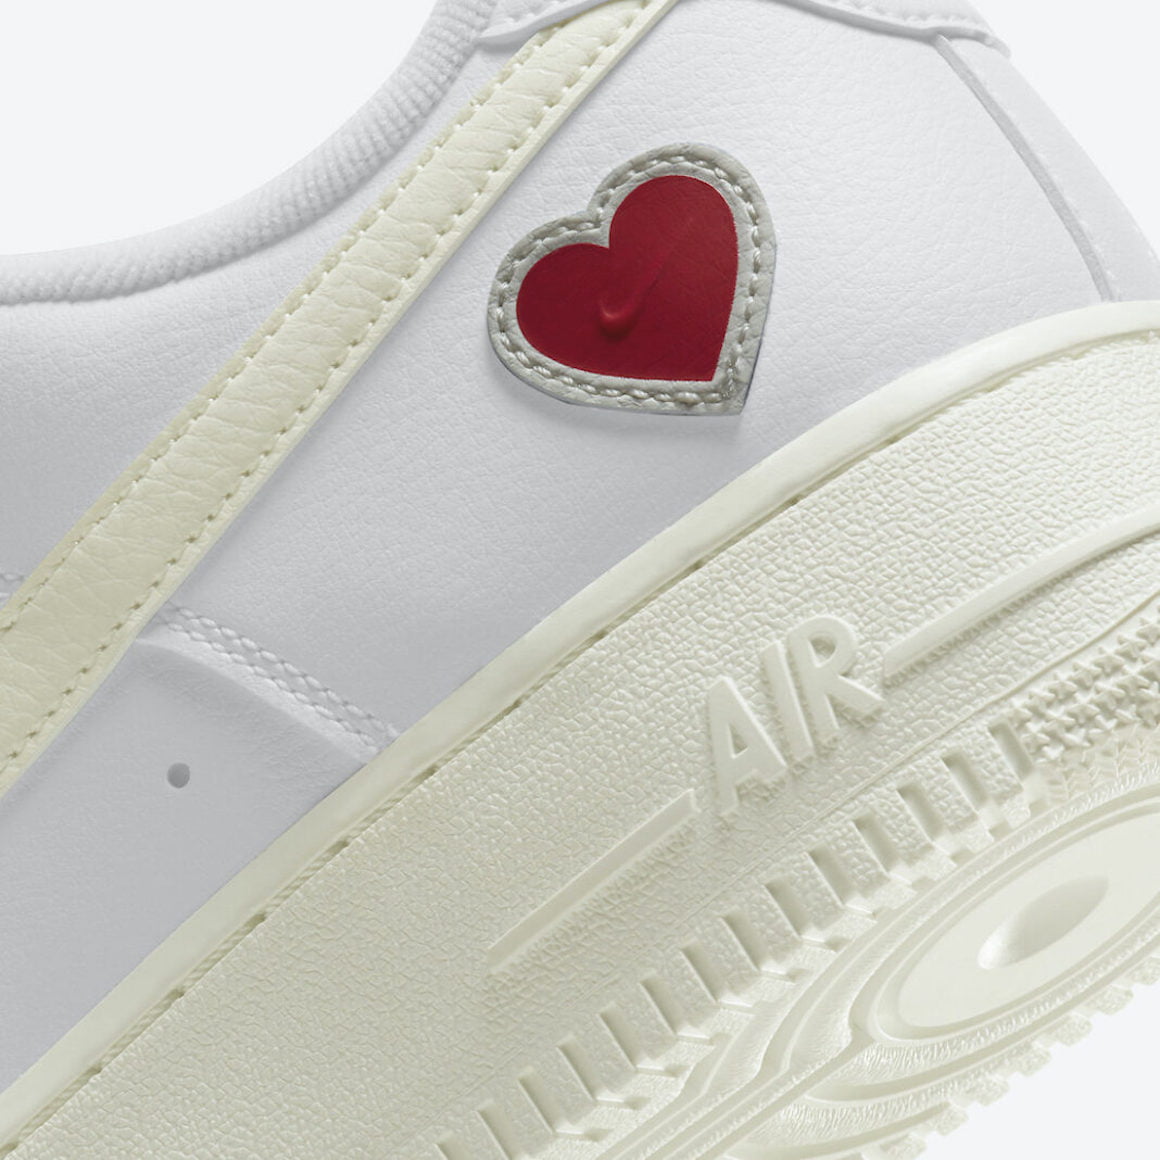 valentines day nike air force 1